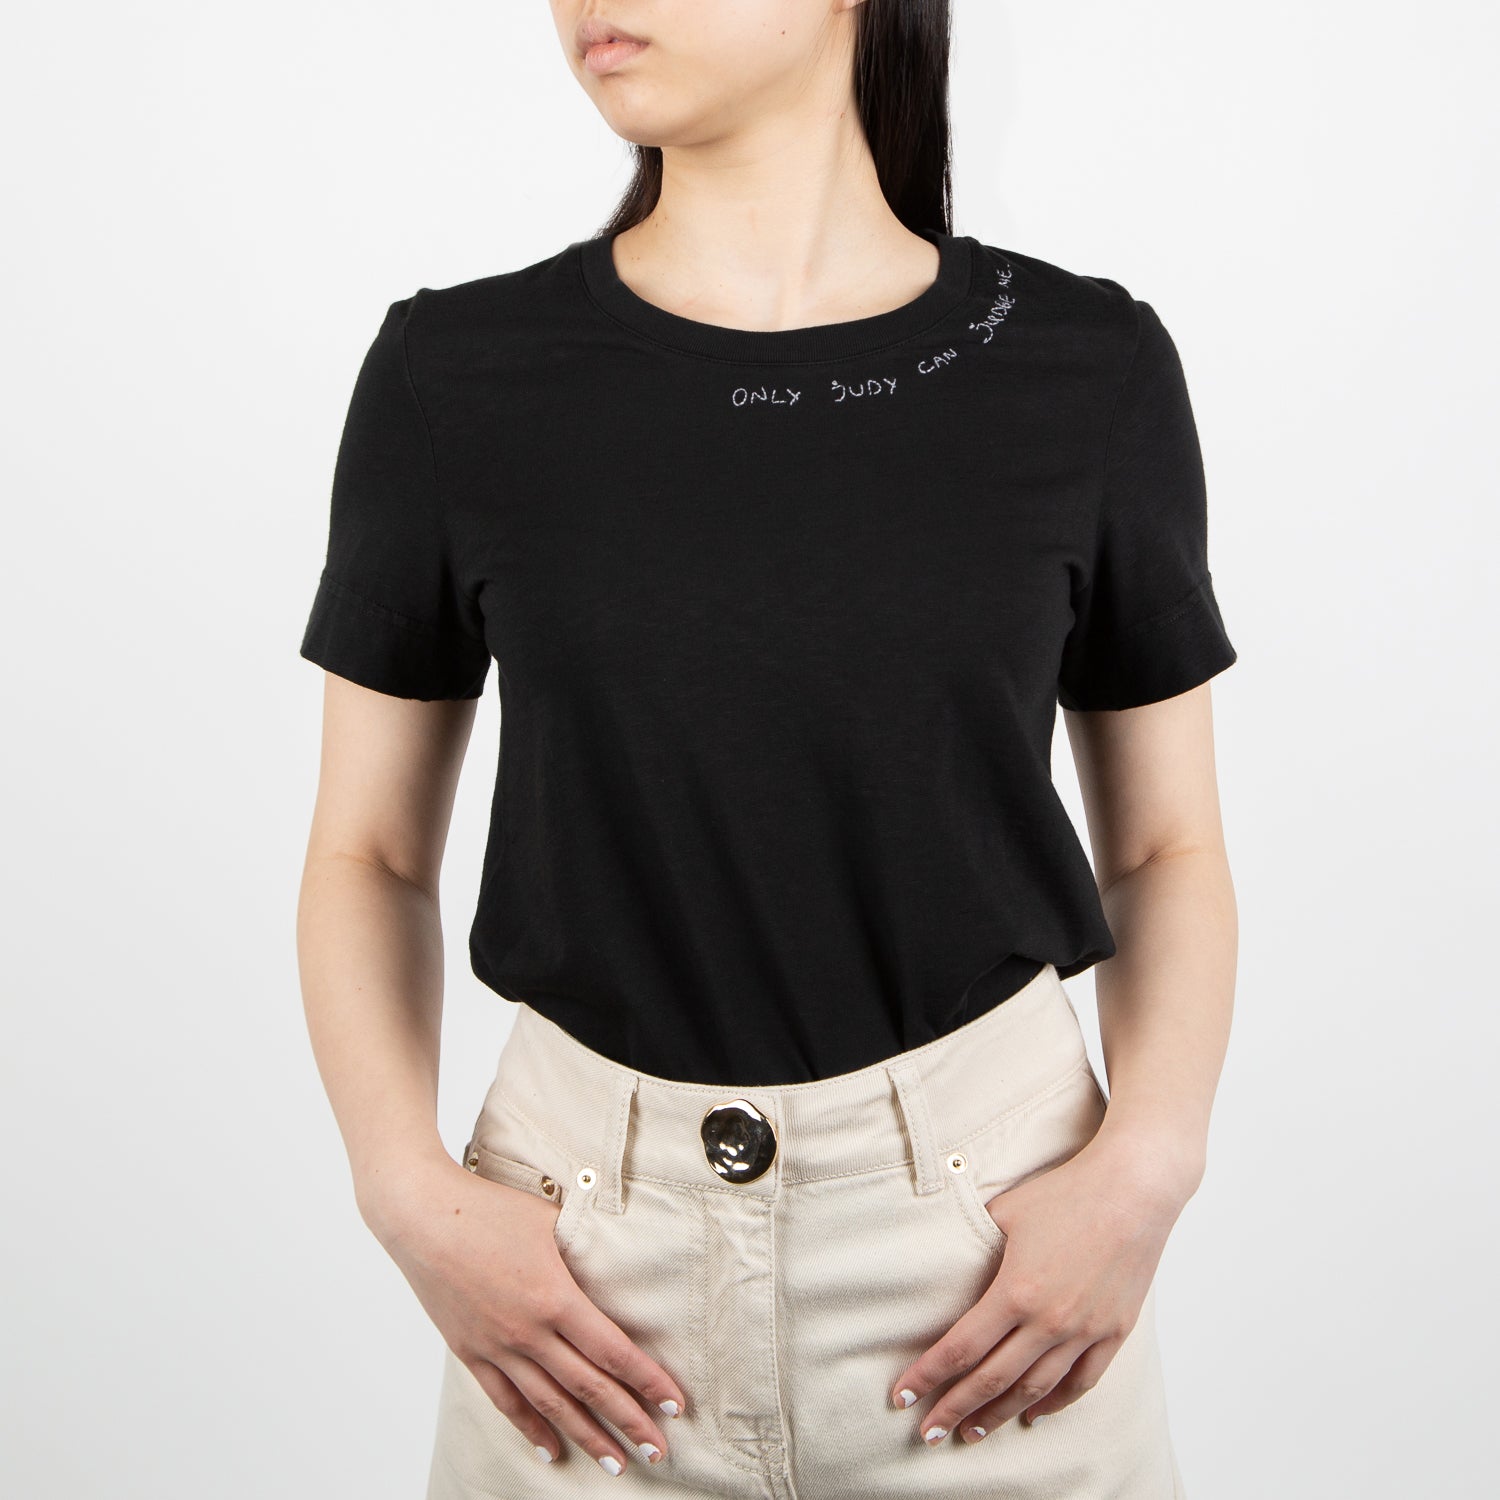 woven black cotton shirt with phrase by Secret Location